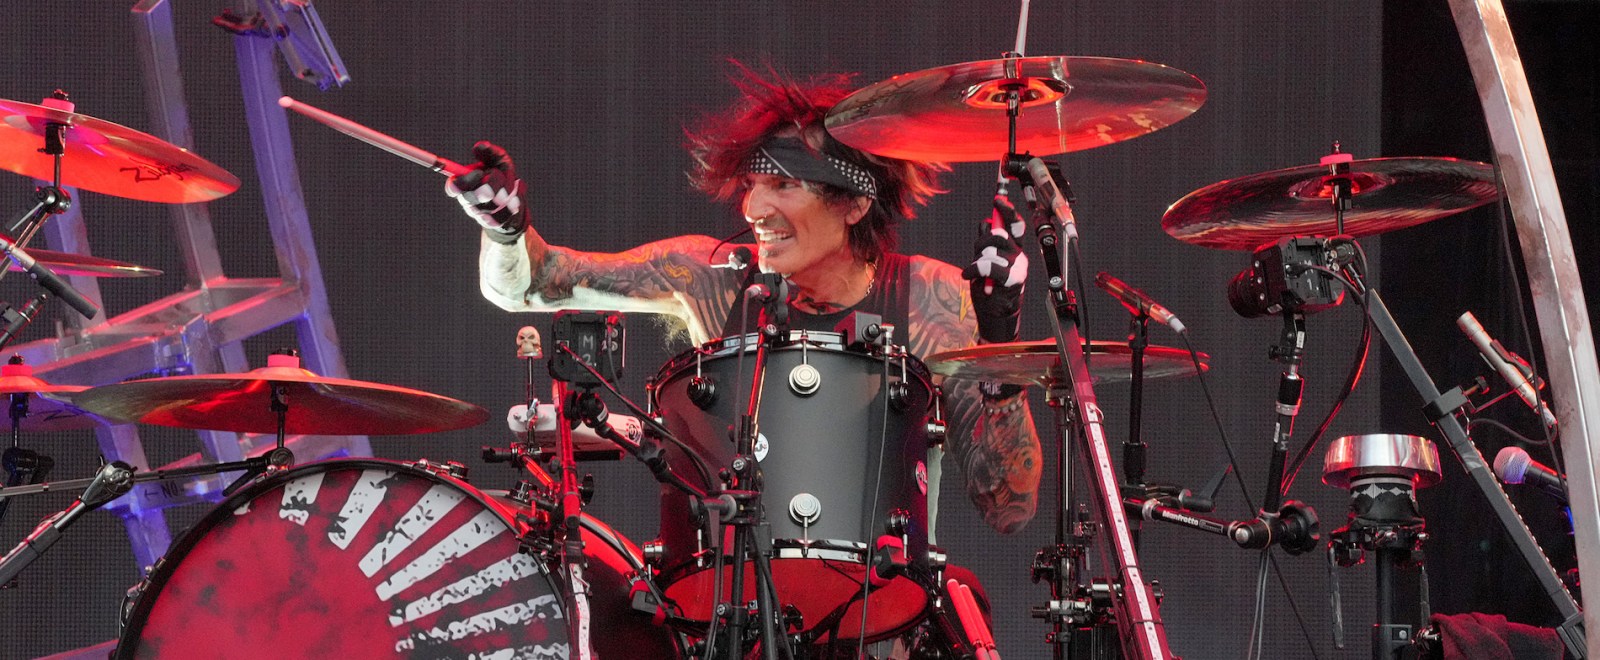 Tommy Lee Told His Audience To 'Pull Your F*cking Junk Out'